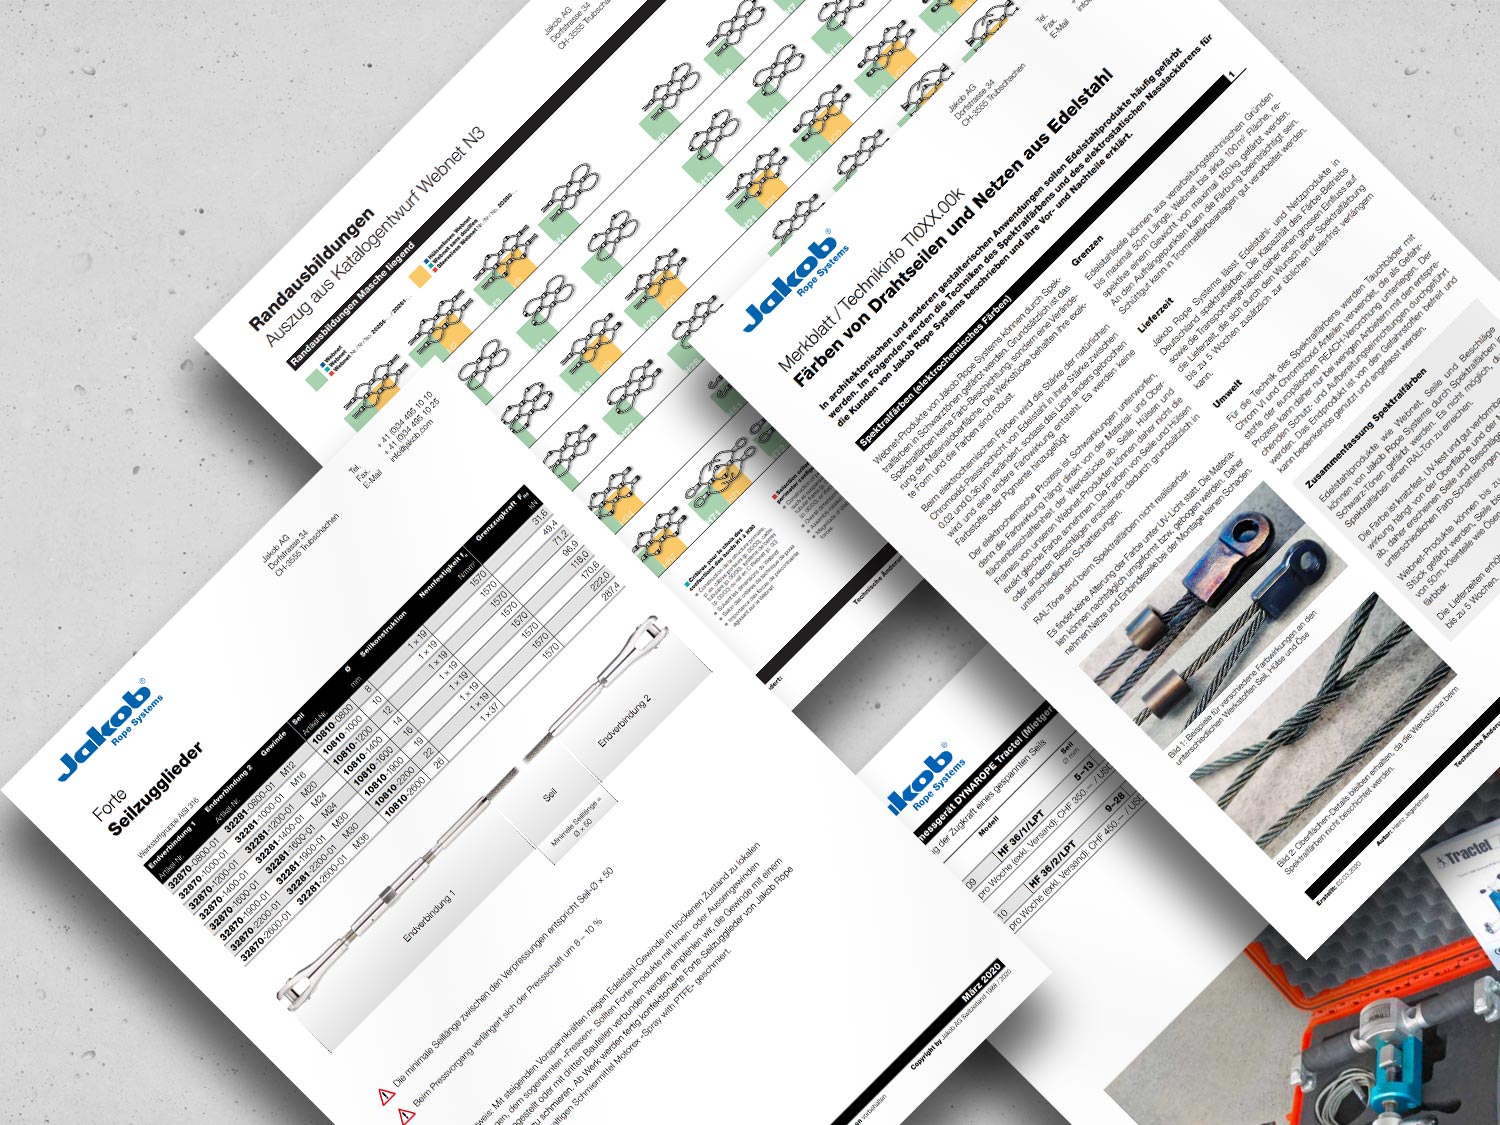 Collage of technical information sheets by Jakob